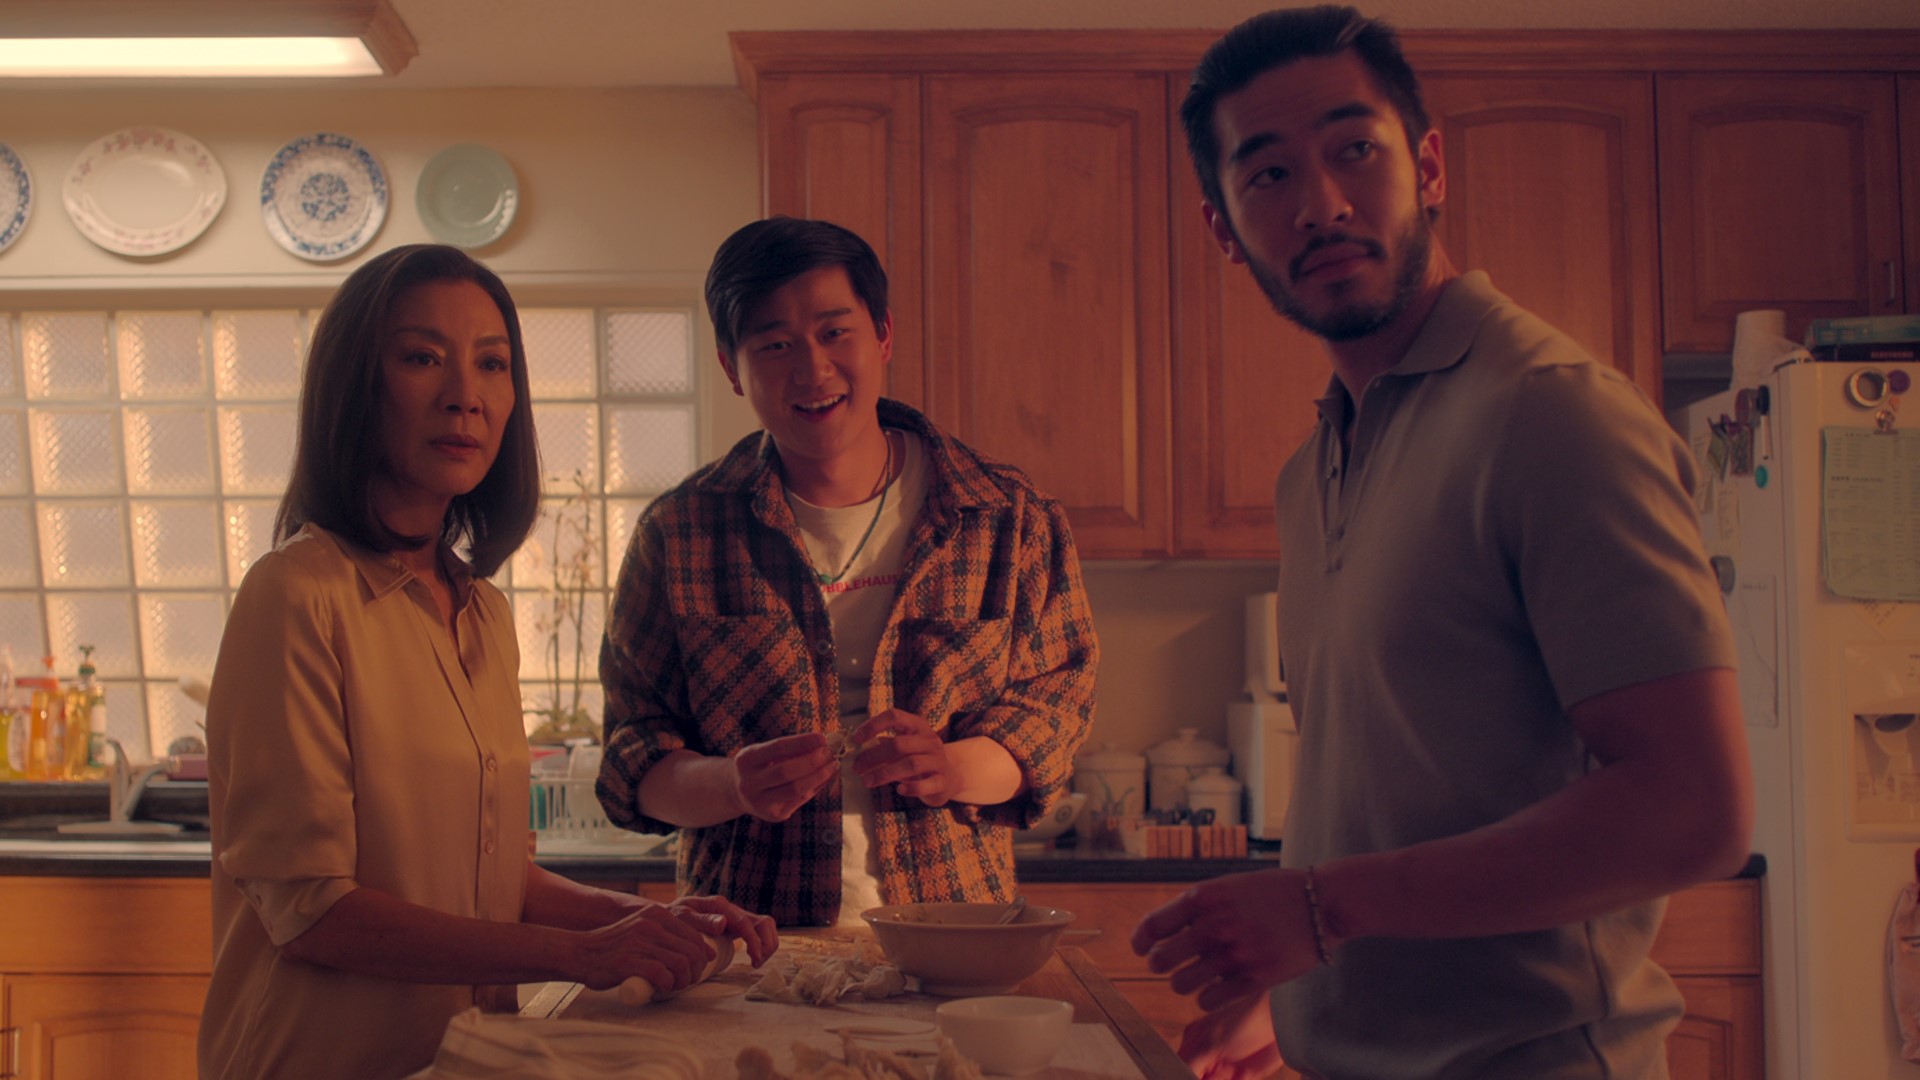 Sam Song Li and Justin Chien co-star in the eight-episode action-comedy series, which is now streaming on Netflix.